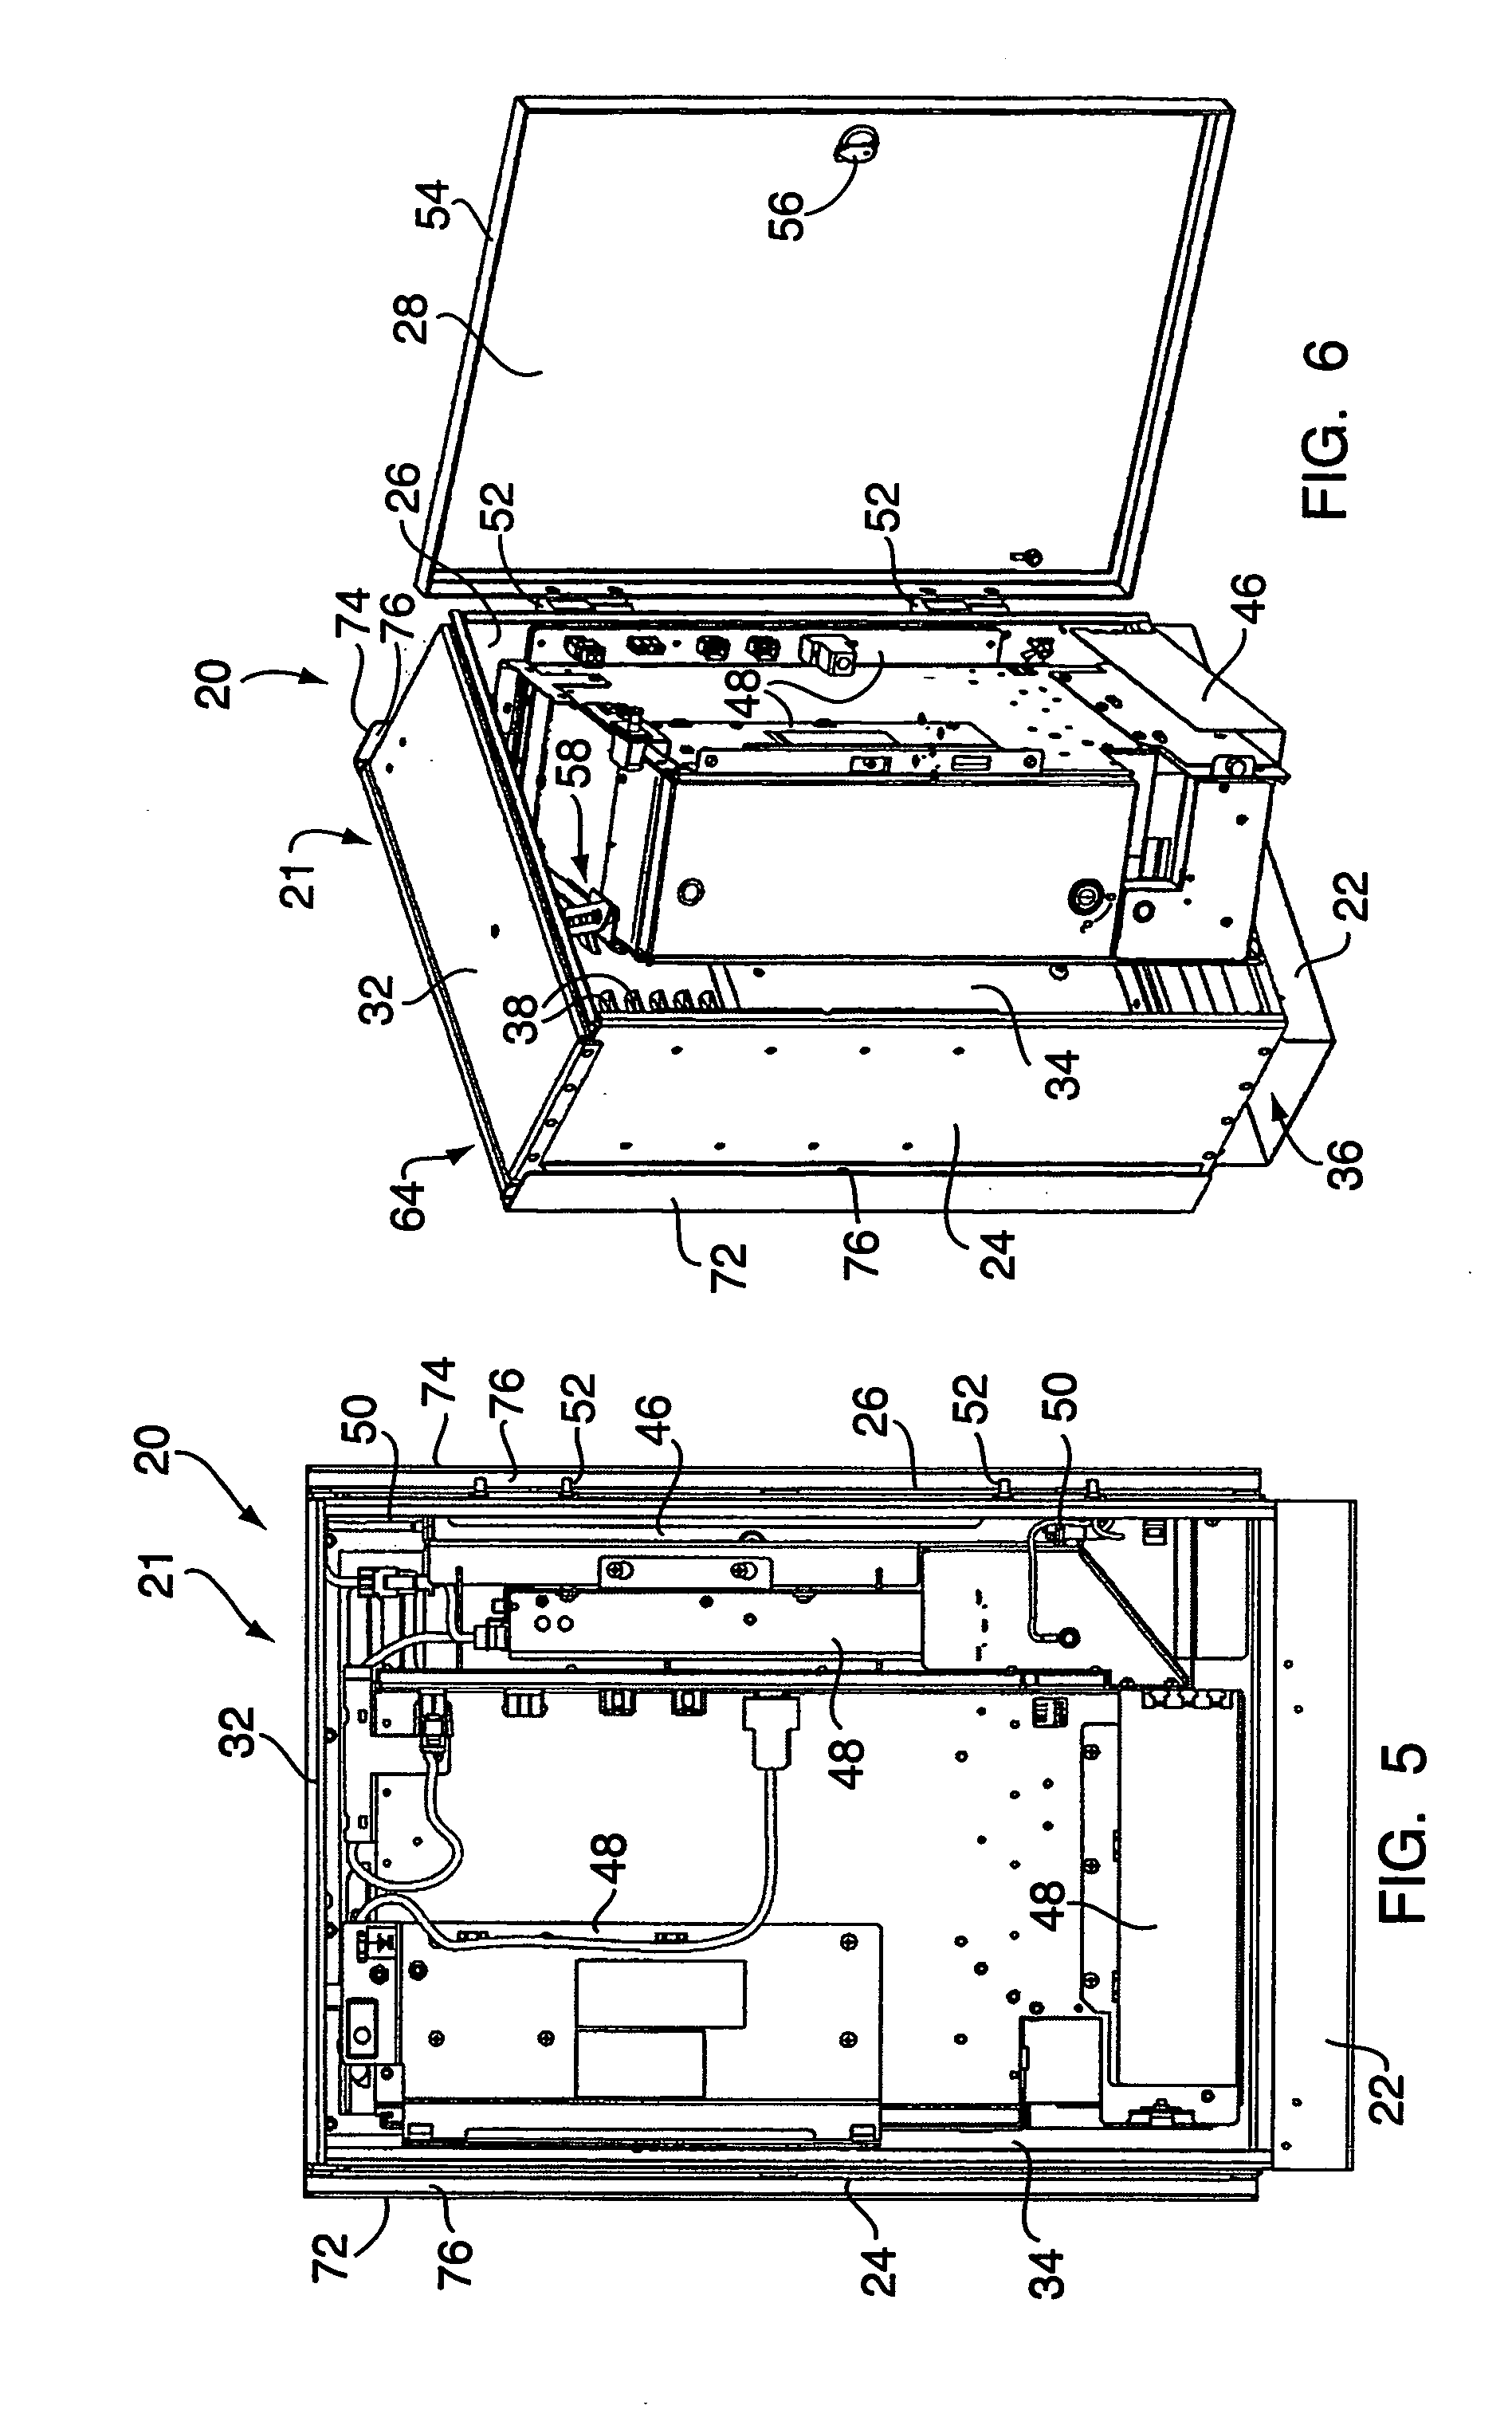 Low-profile articulated electronics enclosure with improved air coolant system